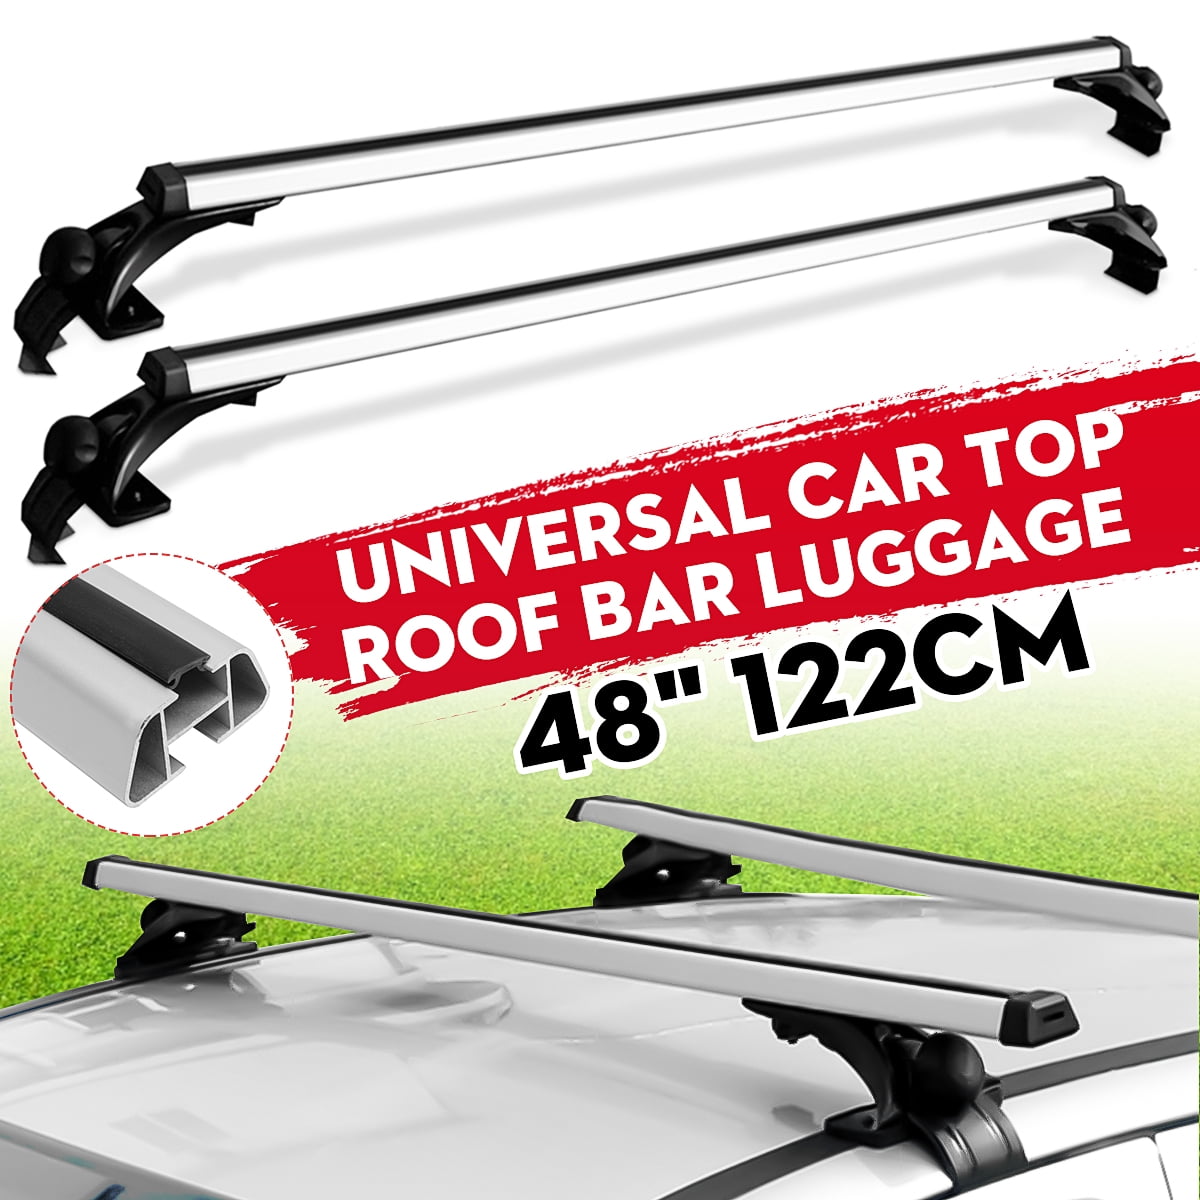 Pair of 48 Car Roof Rack Aluminum Luggage Cross Bar for Toyota Prius 2007-2017 Waterproof Car Luggage Rack Cargo Carrier Max Load 150LBS 2 Years Warranty